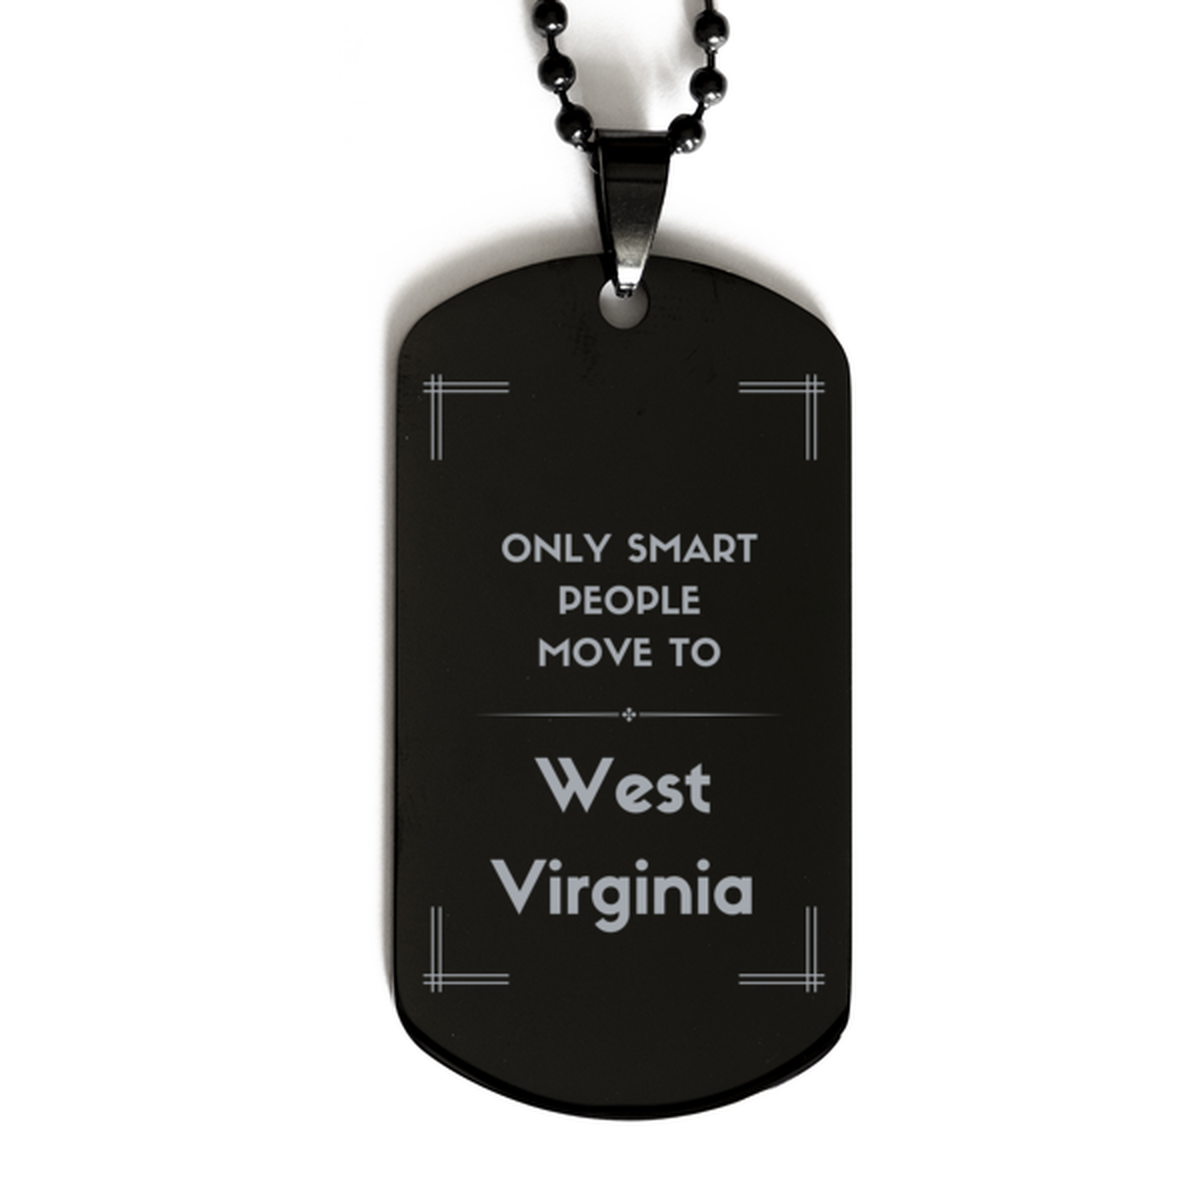 Only smart people move to West Virginia Black Dog Tag, Gag Gifts For West Virginia, Move to West Virginia Gifts for Friends Coworker Funny Saying Quote